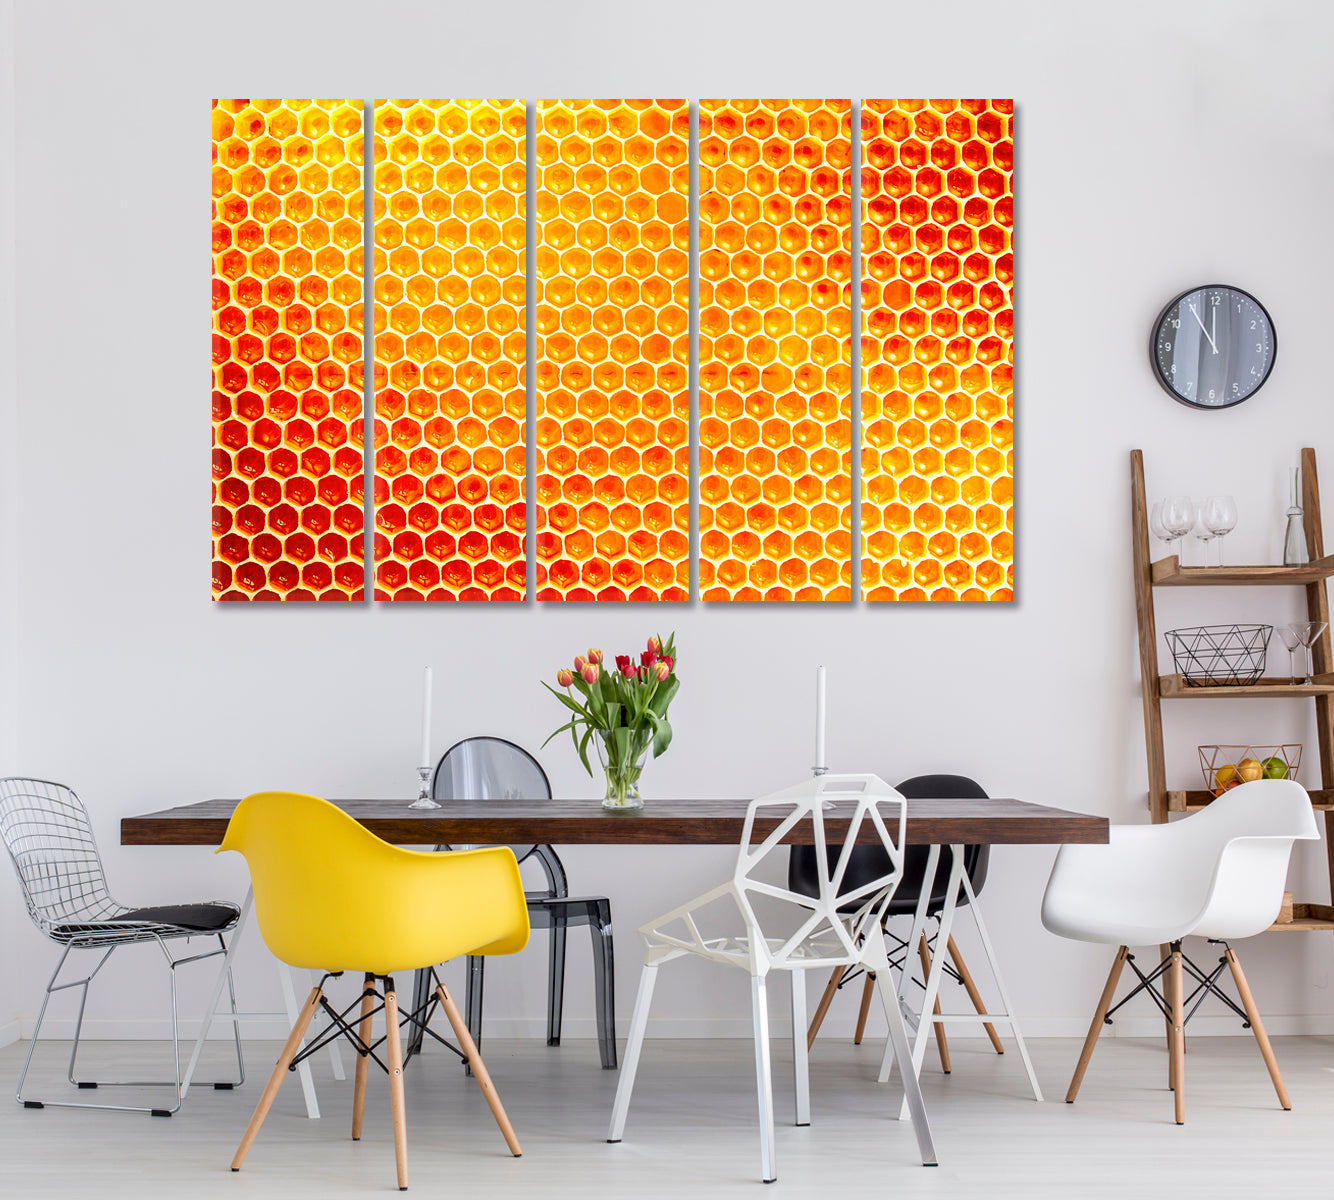 Honeycomb from Beehive Canvas Print ArtLexy   